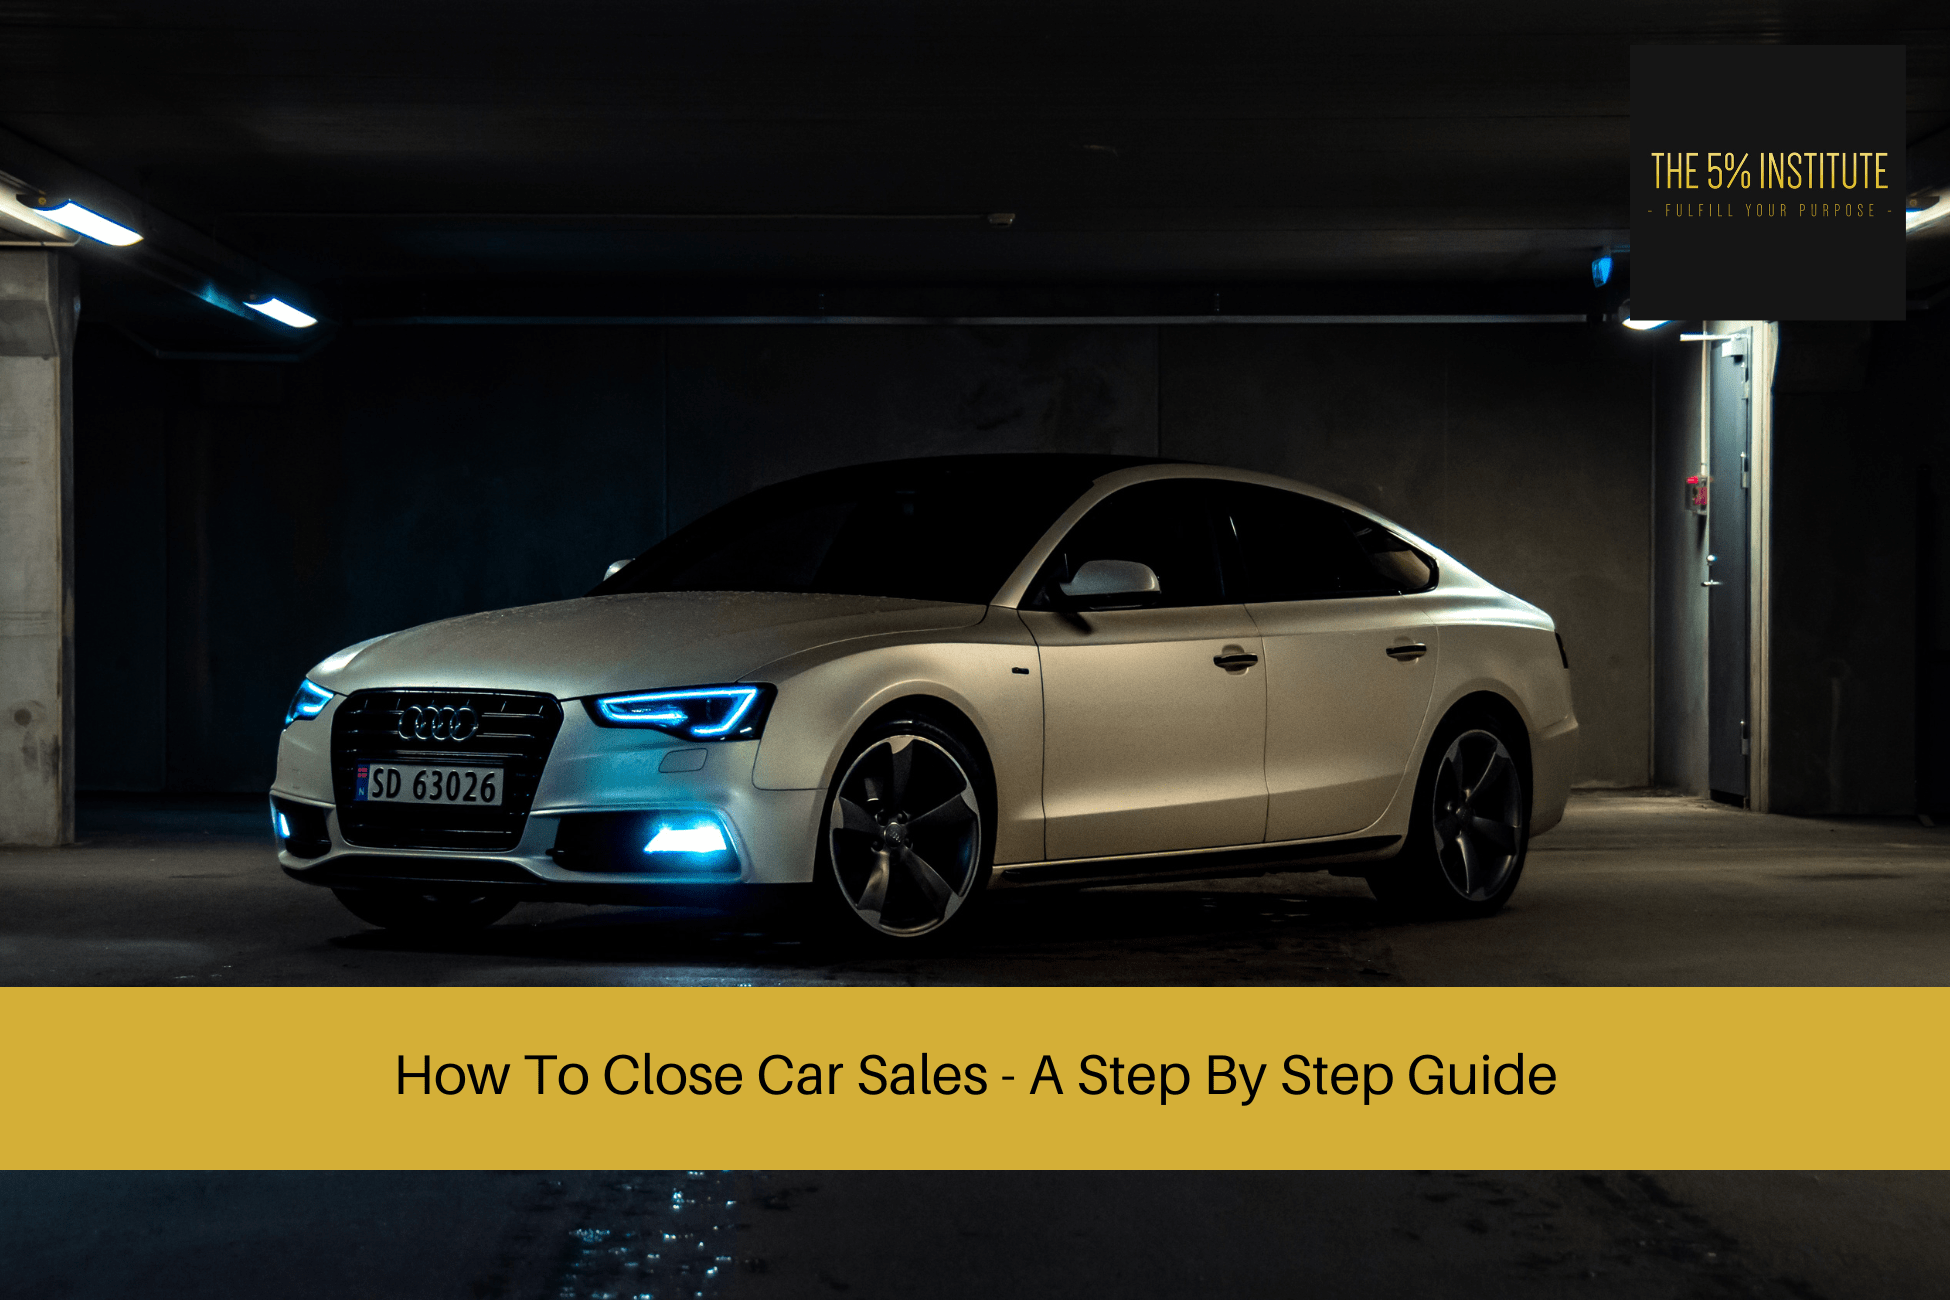 How To Close Car Sales - A Step By Step Guide